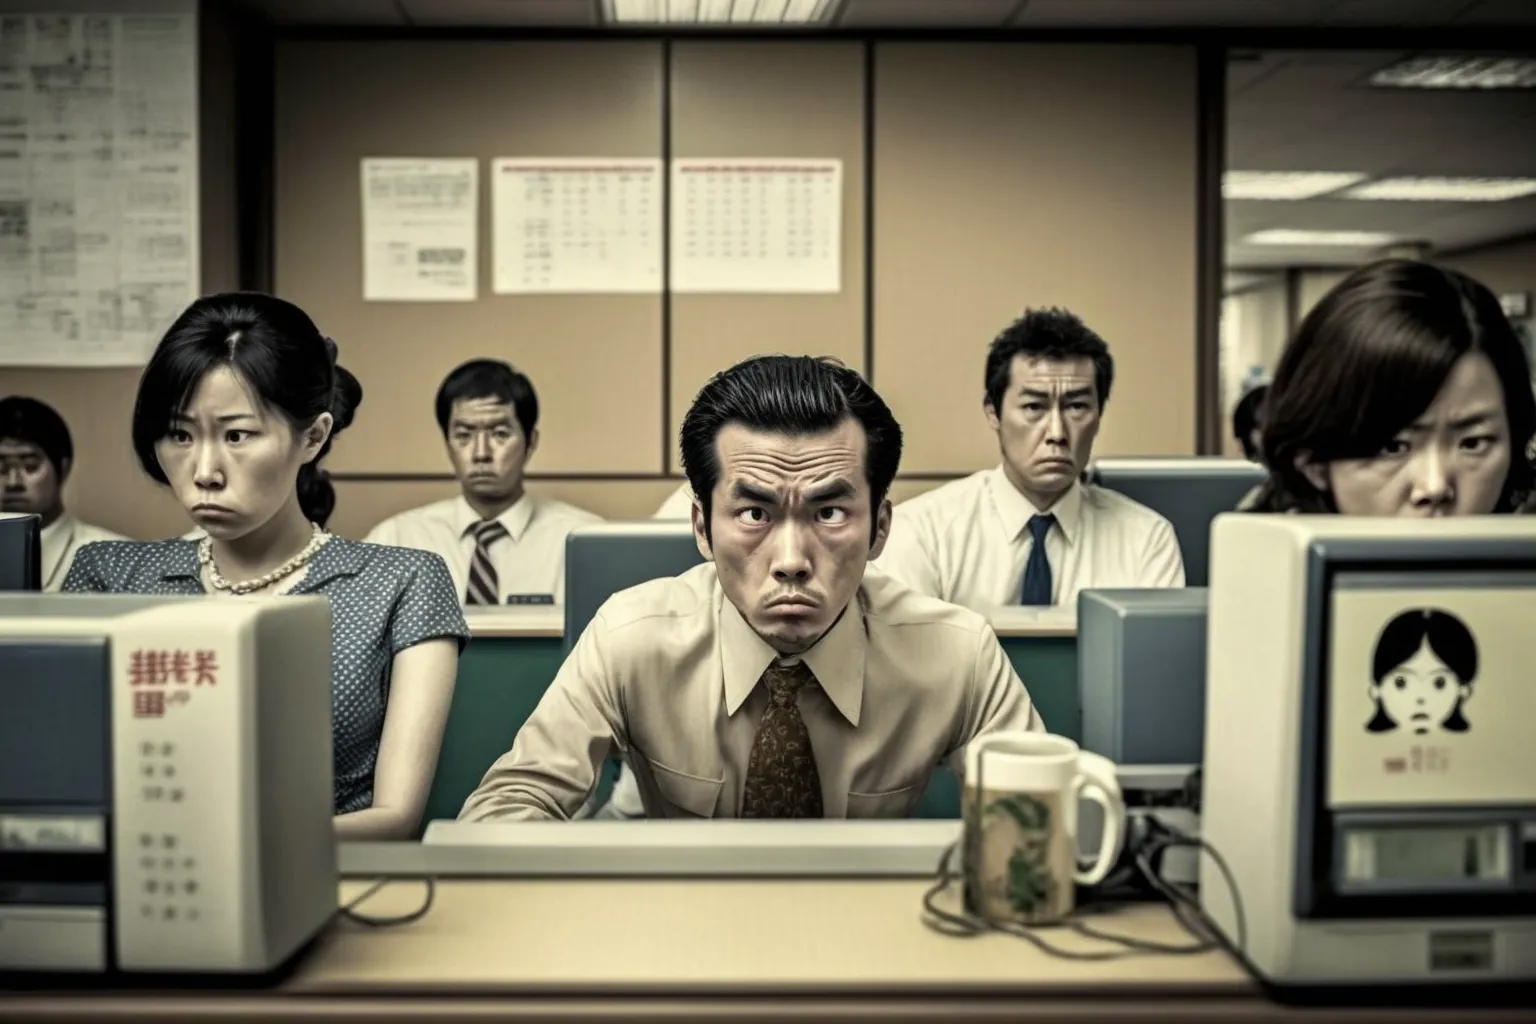 Does Japan have a toxic work culture?